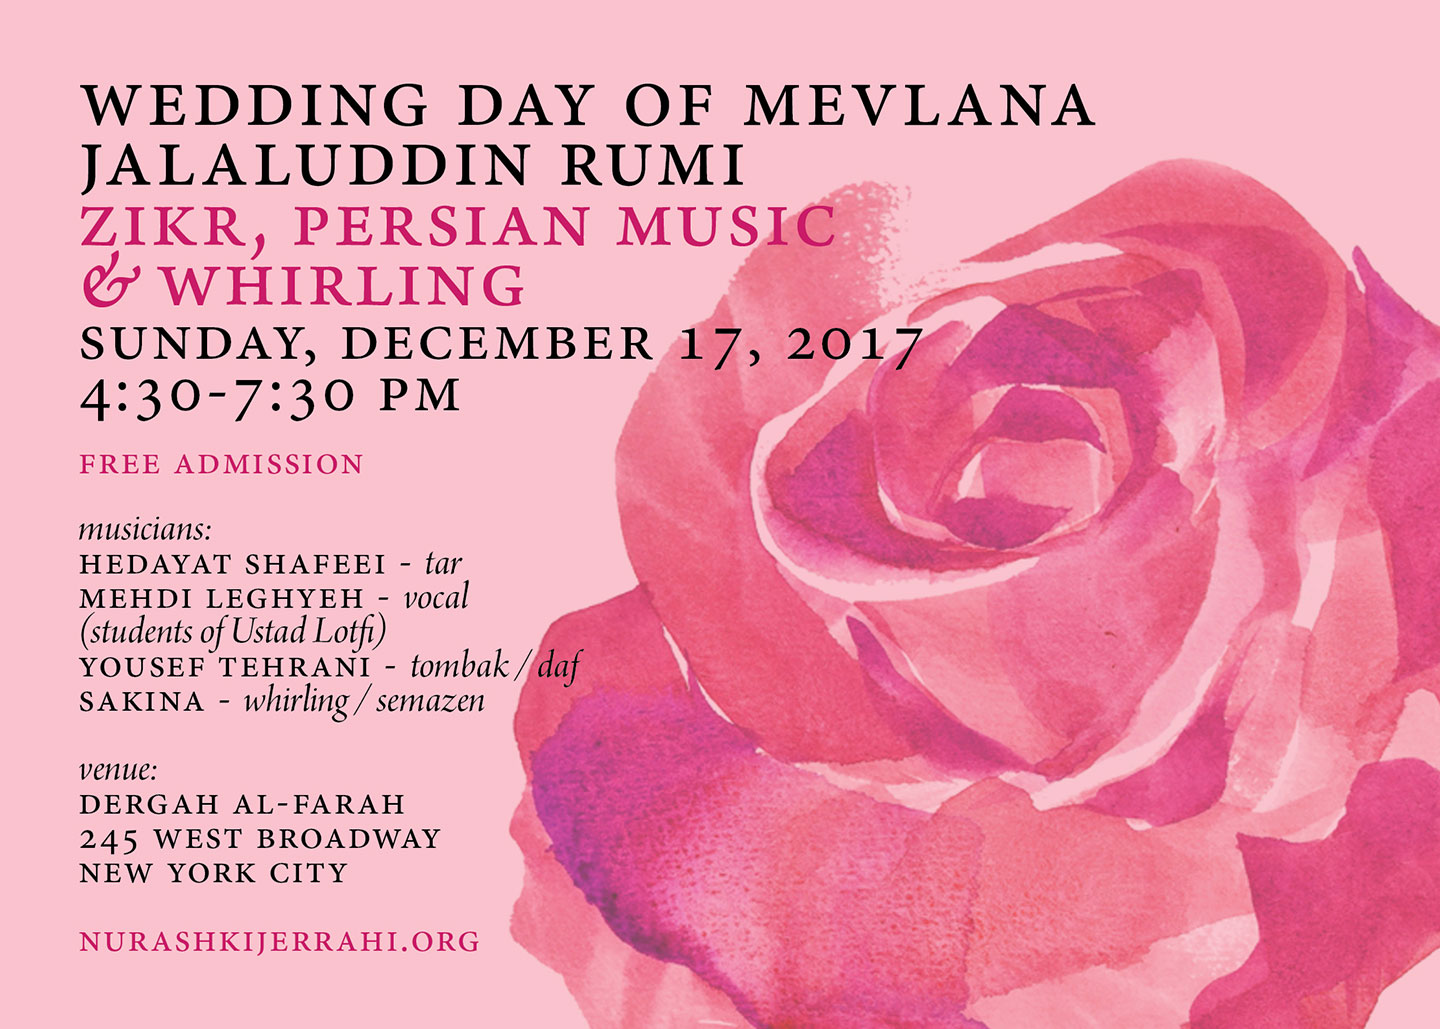 Sunday, December 17, 2017 | Wedding Day of Mevlana Jalaluddin Rumi | Zikr, Persian Music & Whirling | 4:30 – 7:30 pm | Free Admission